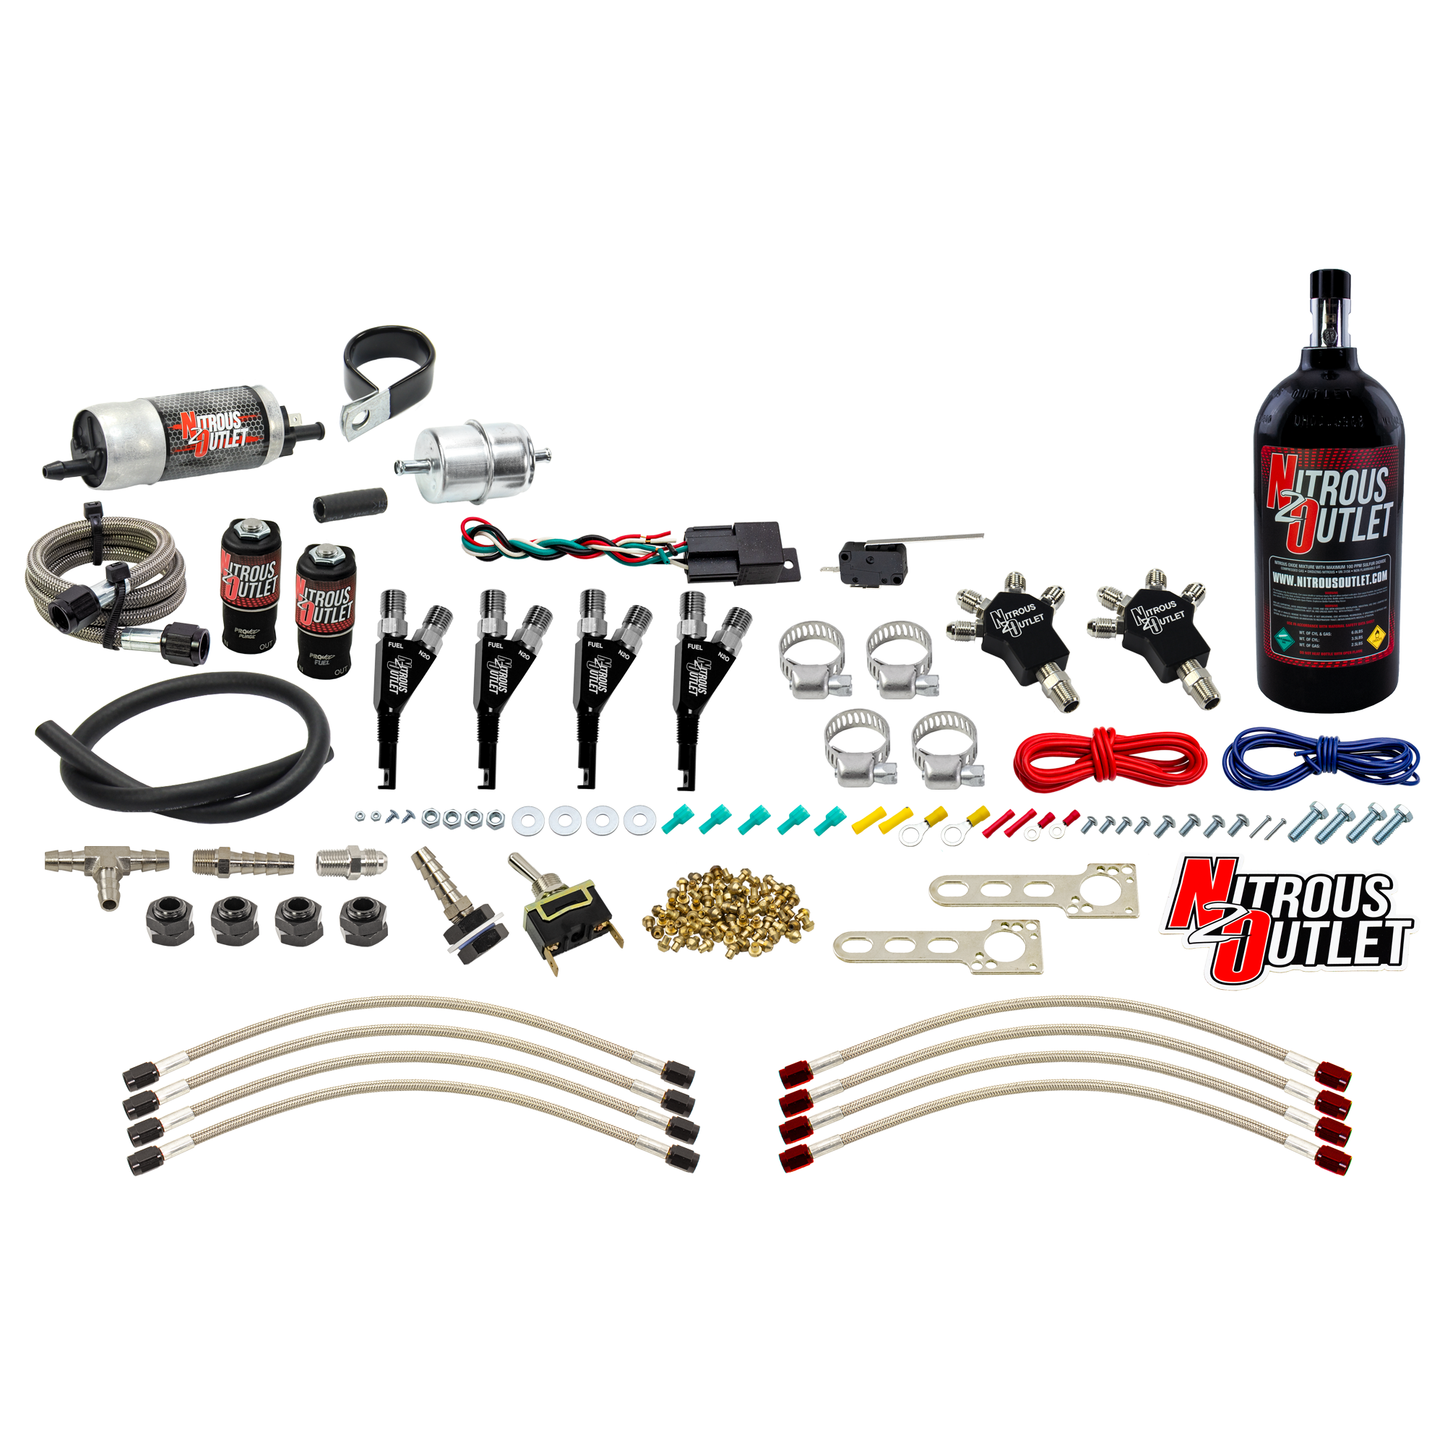 Powersports Carbureted Four Cylinder Nozzle System - .078 Nitrous/.155 Fuel - 90° Stainless Steel Nozzles